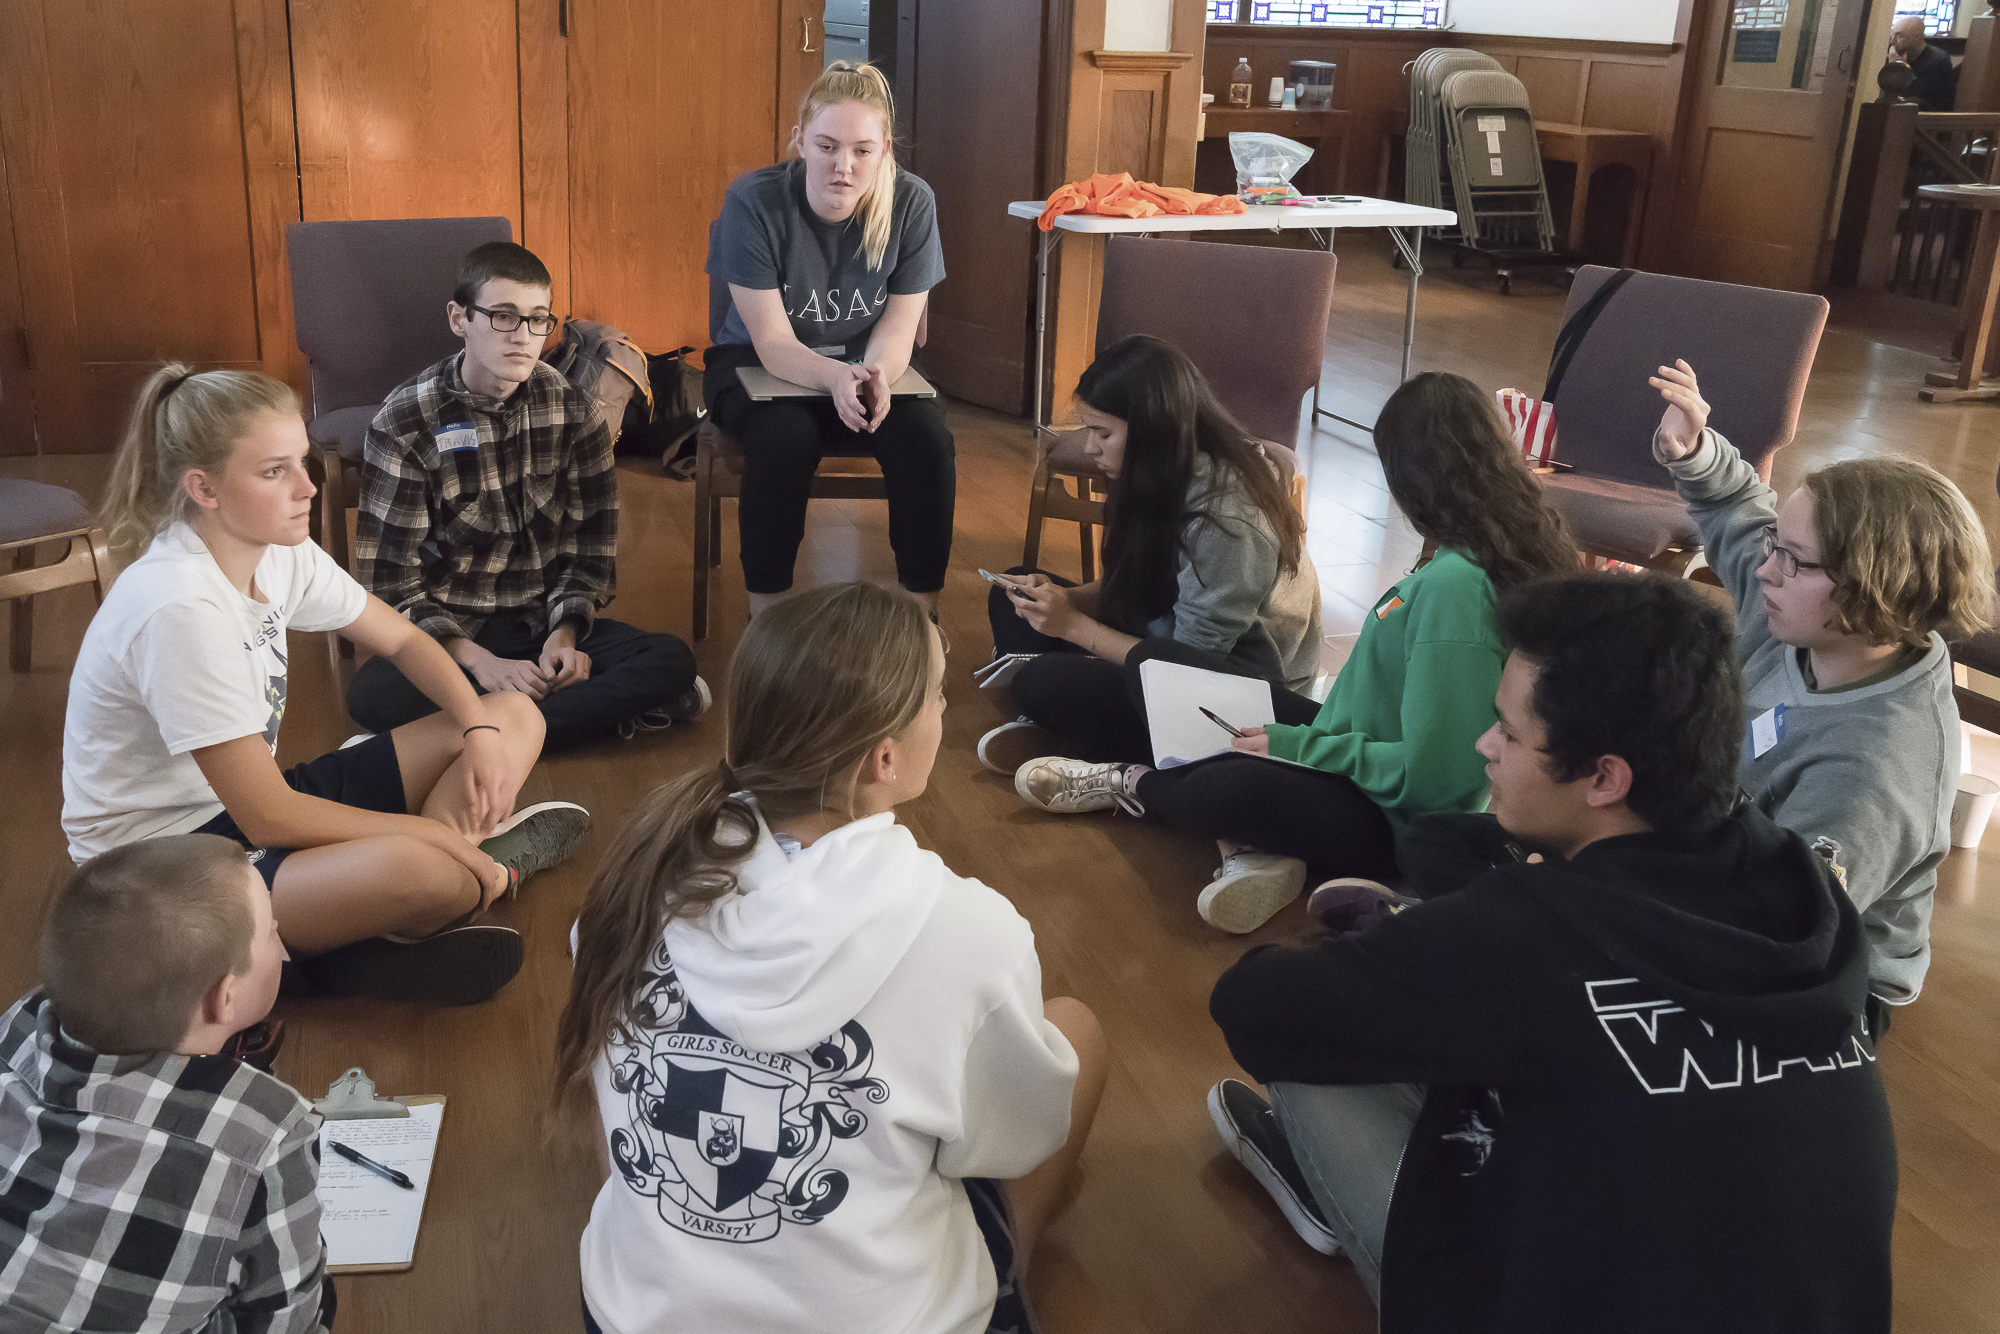  Students from several Los Angeles area high schools met in Santa Monica, California on Tuesday, April 17, 2018 to discuss a planned walkout and protest rally at Santa Monica City Hall on Friday, April 20. Clockwise from top center: Camille Hannant, 